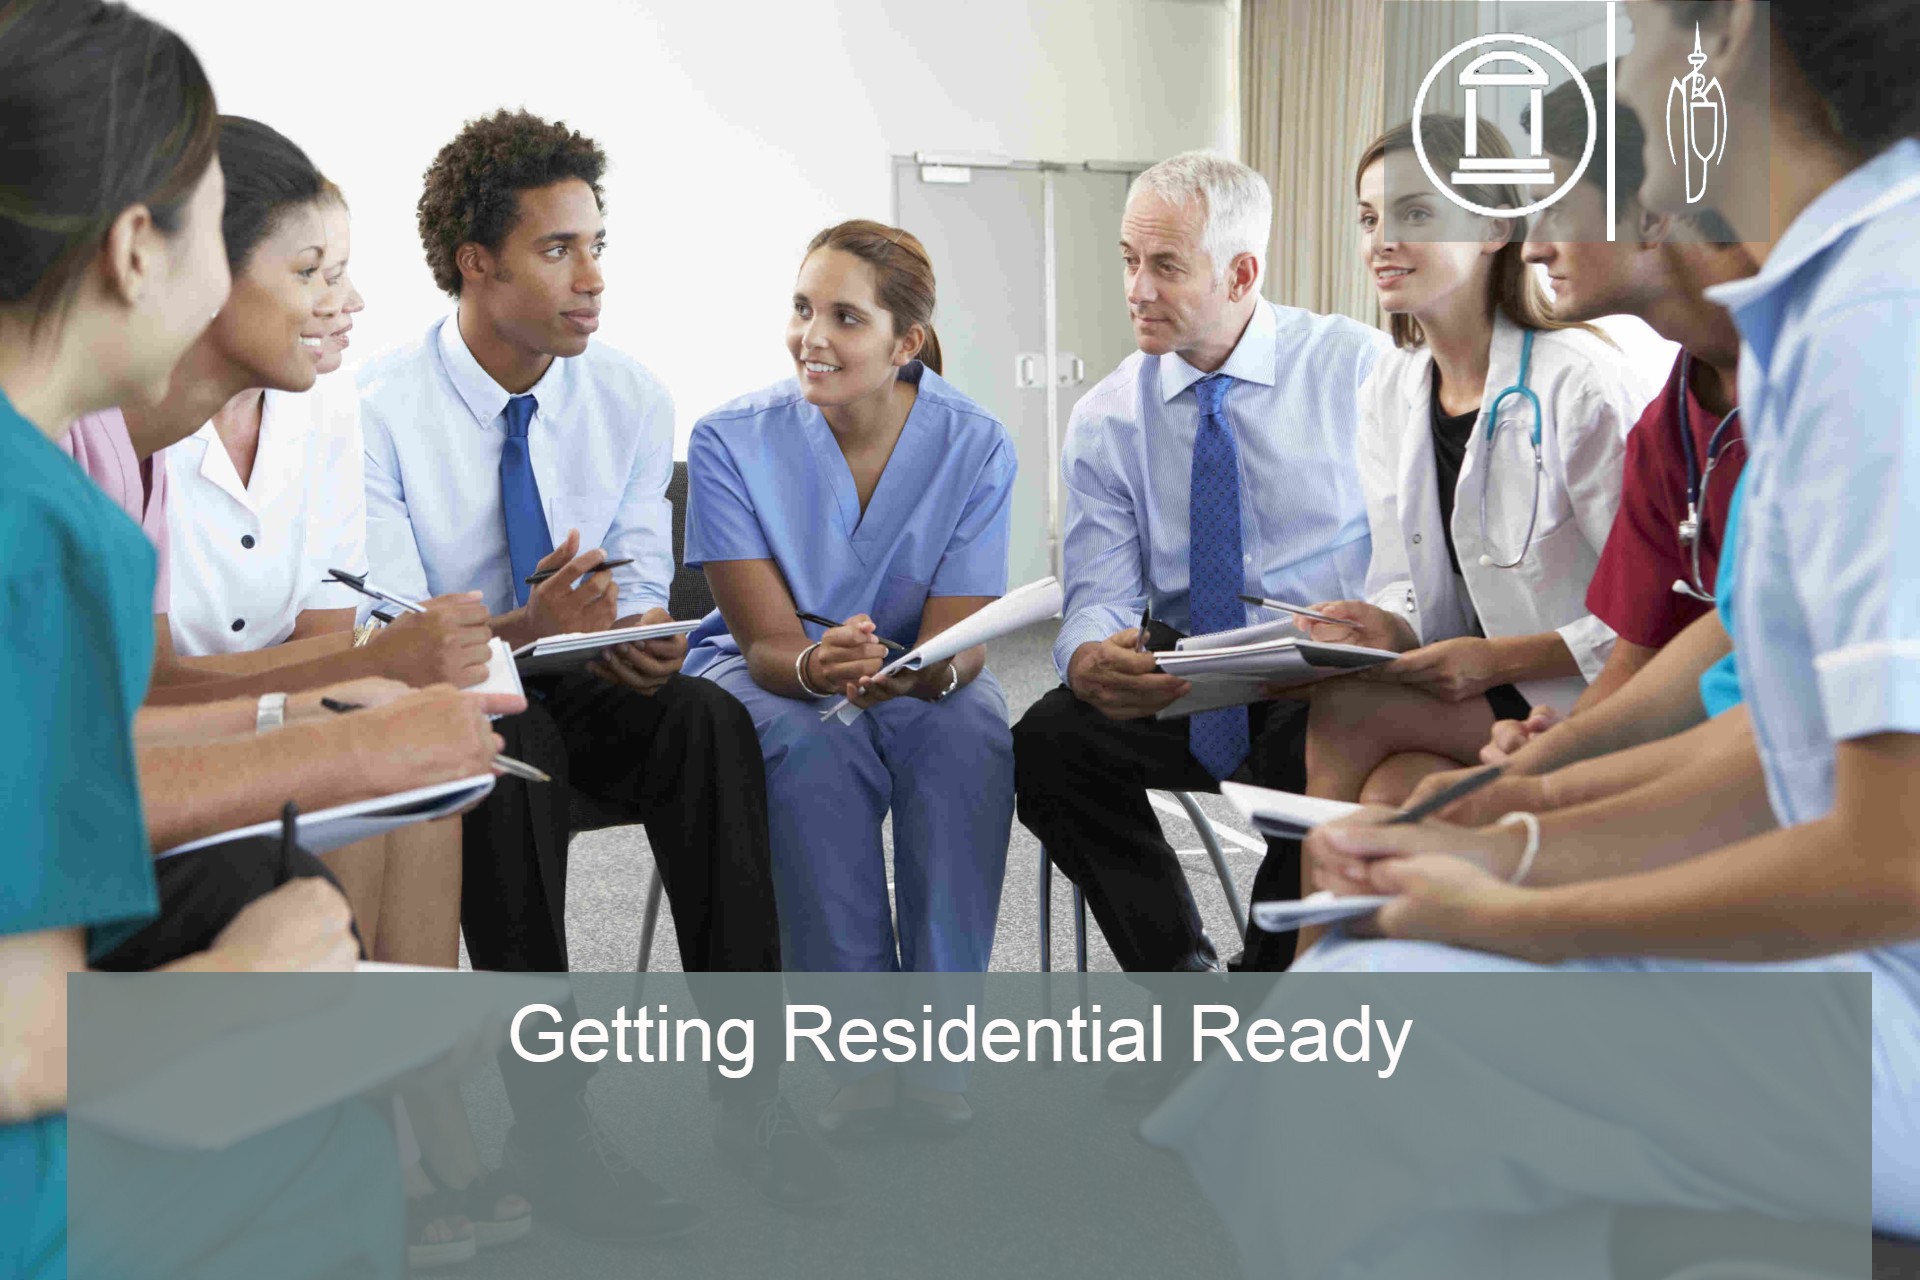 Getting Residential Ready - Optional for Current Staff